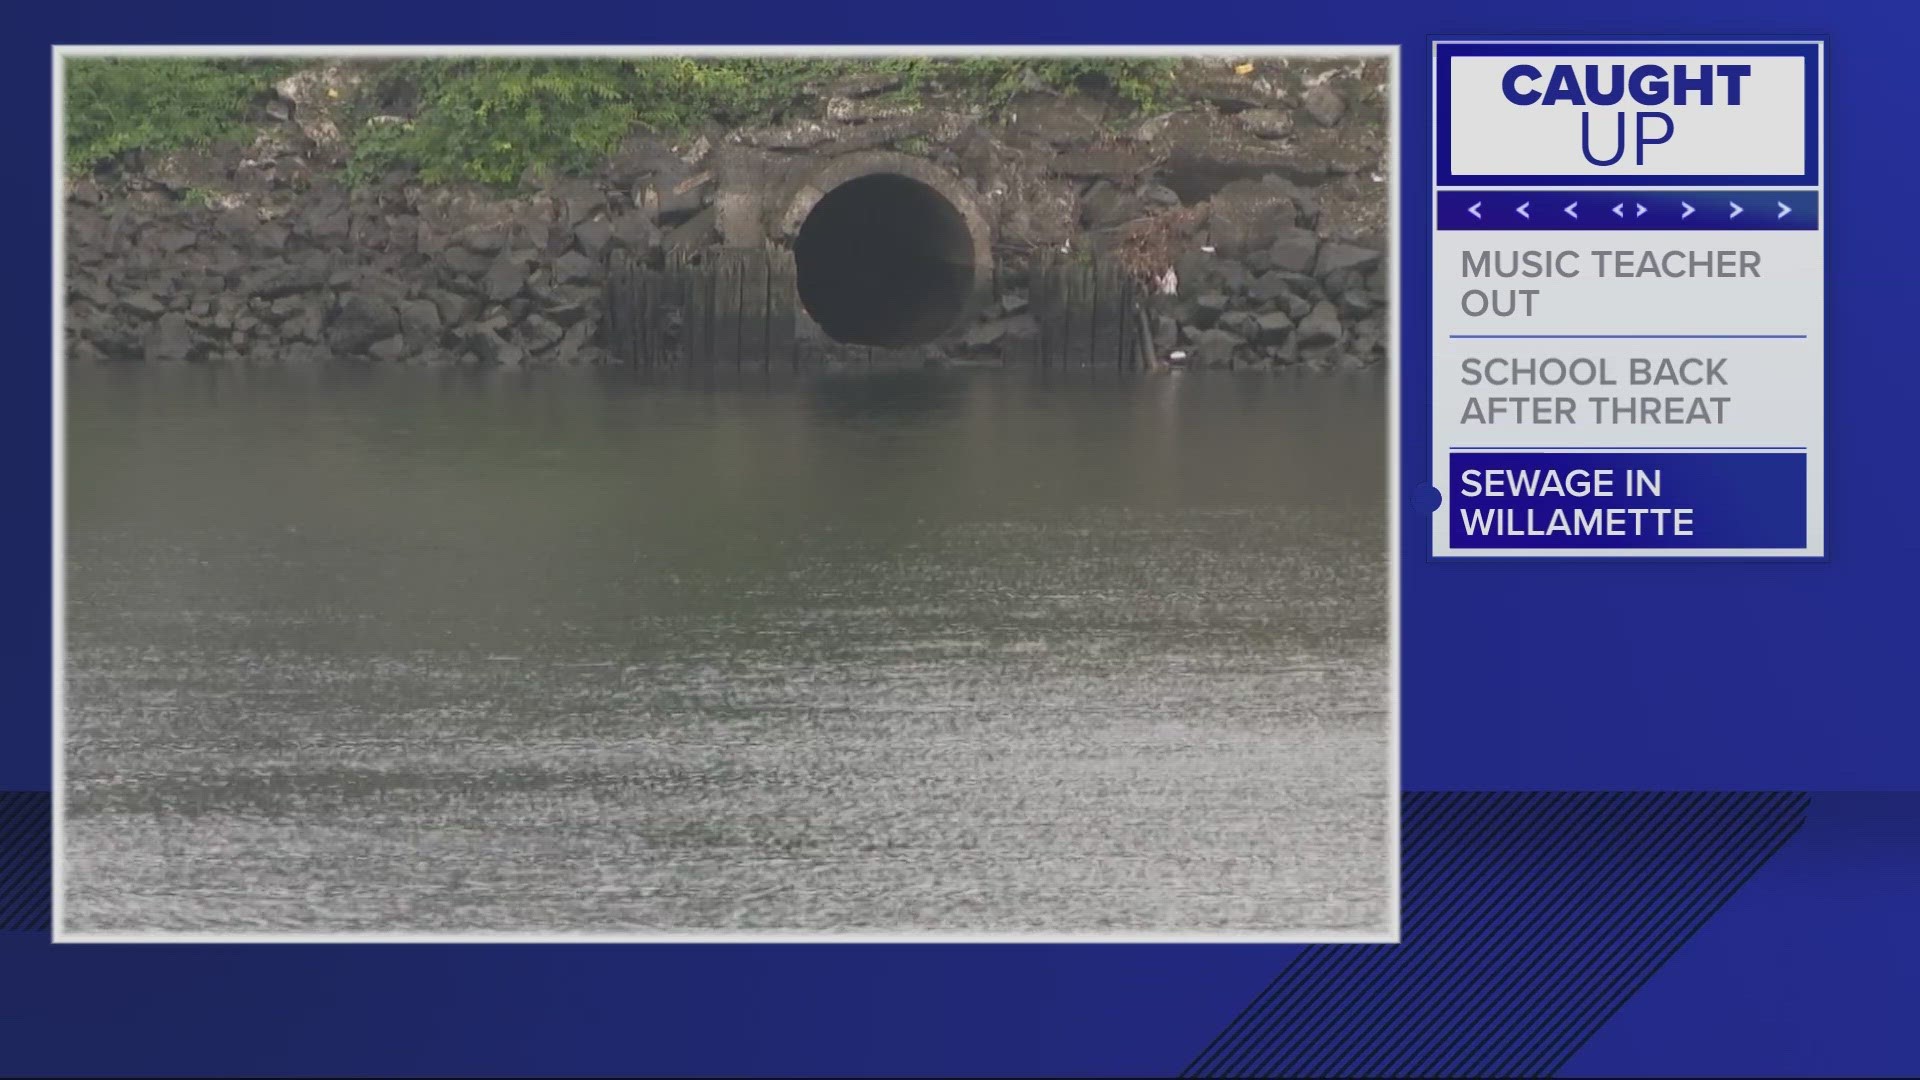 Nearly 11,000 gallons of sewage were discharged into the river early Monday morning, according to Portland's Bureau of Environmental Services.